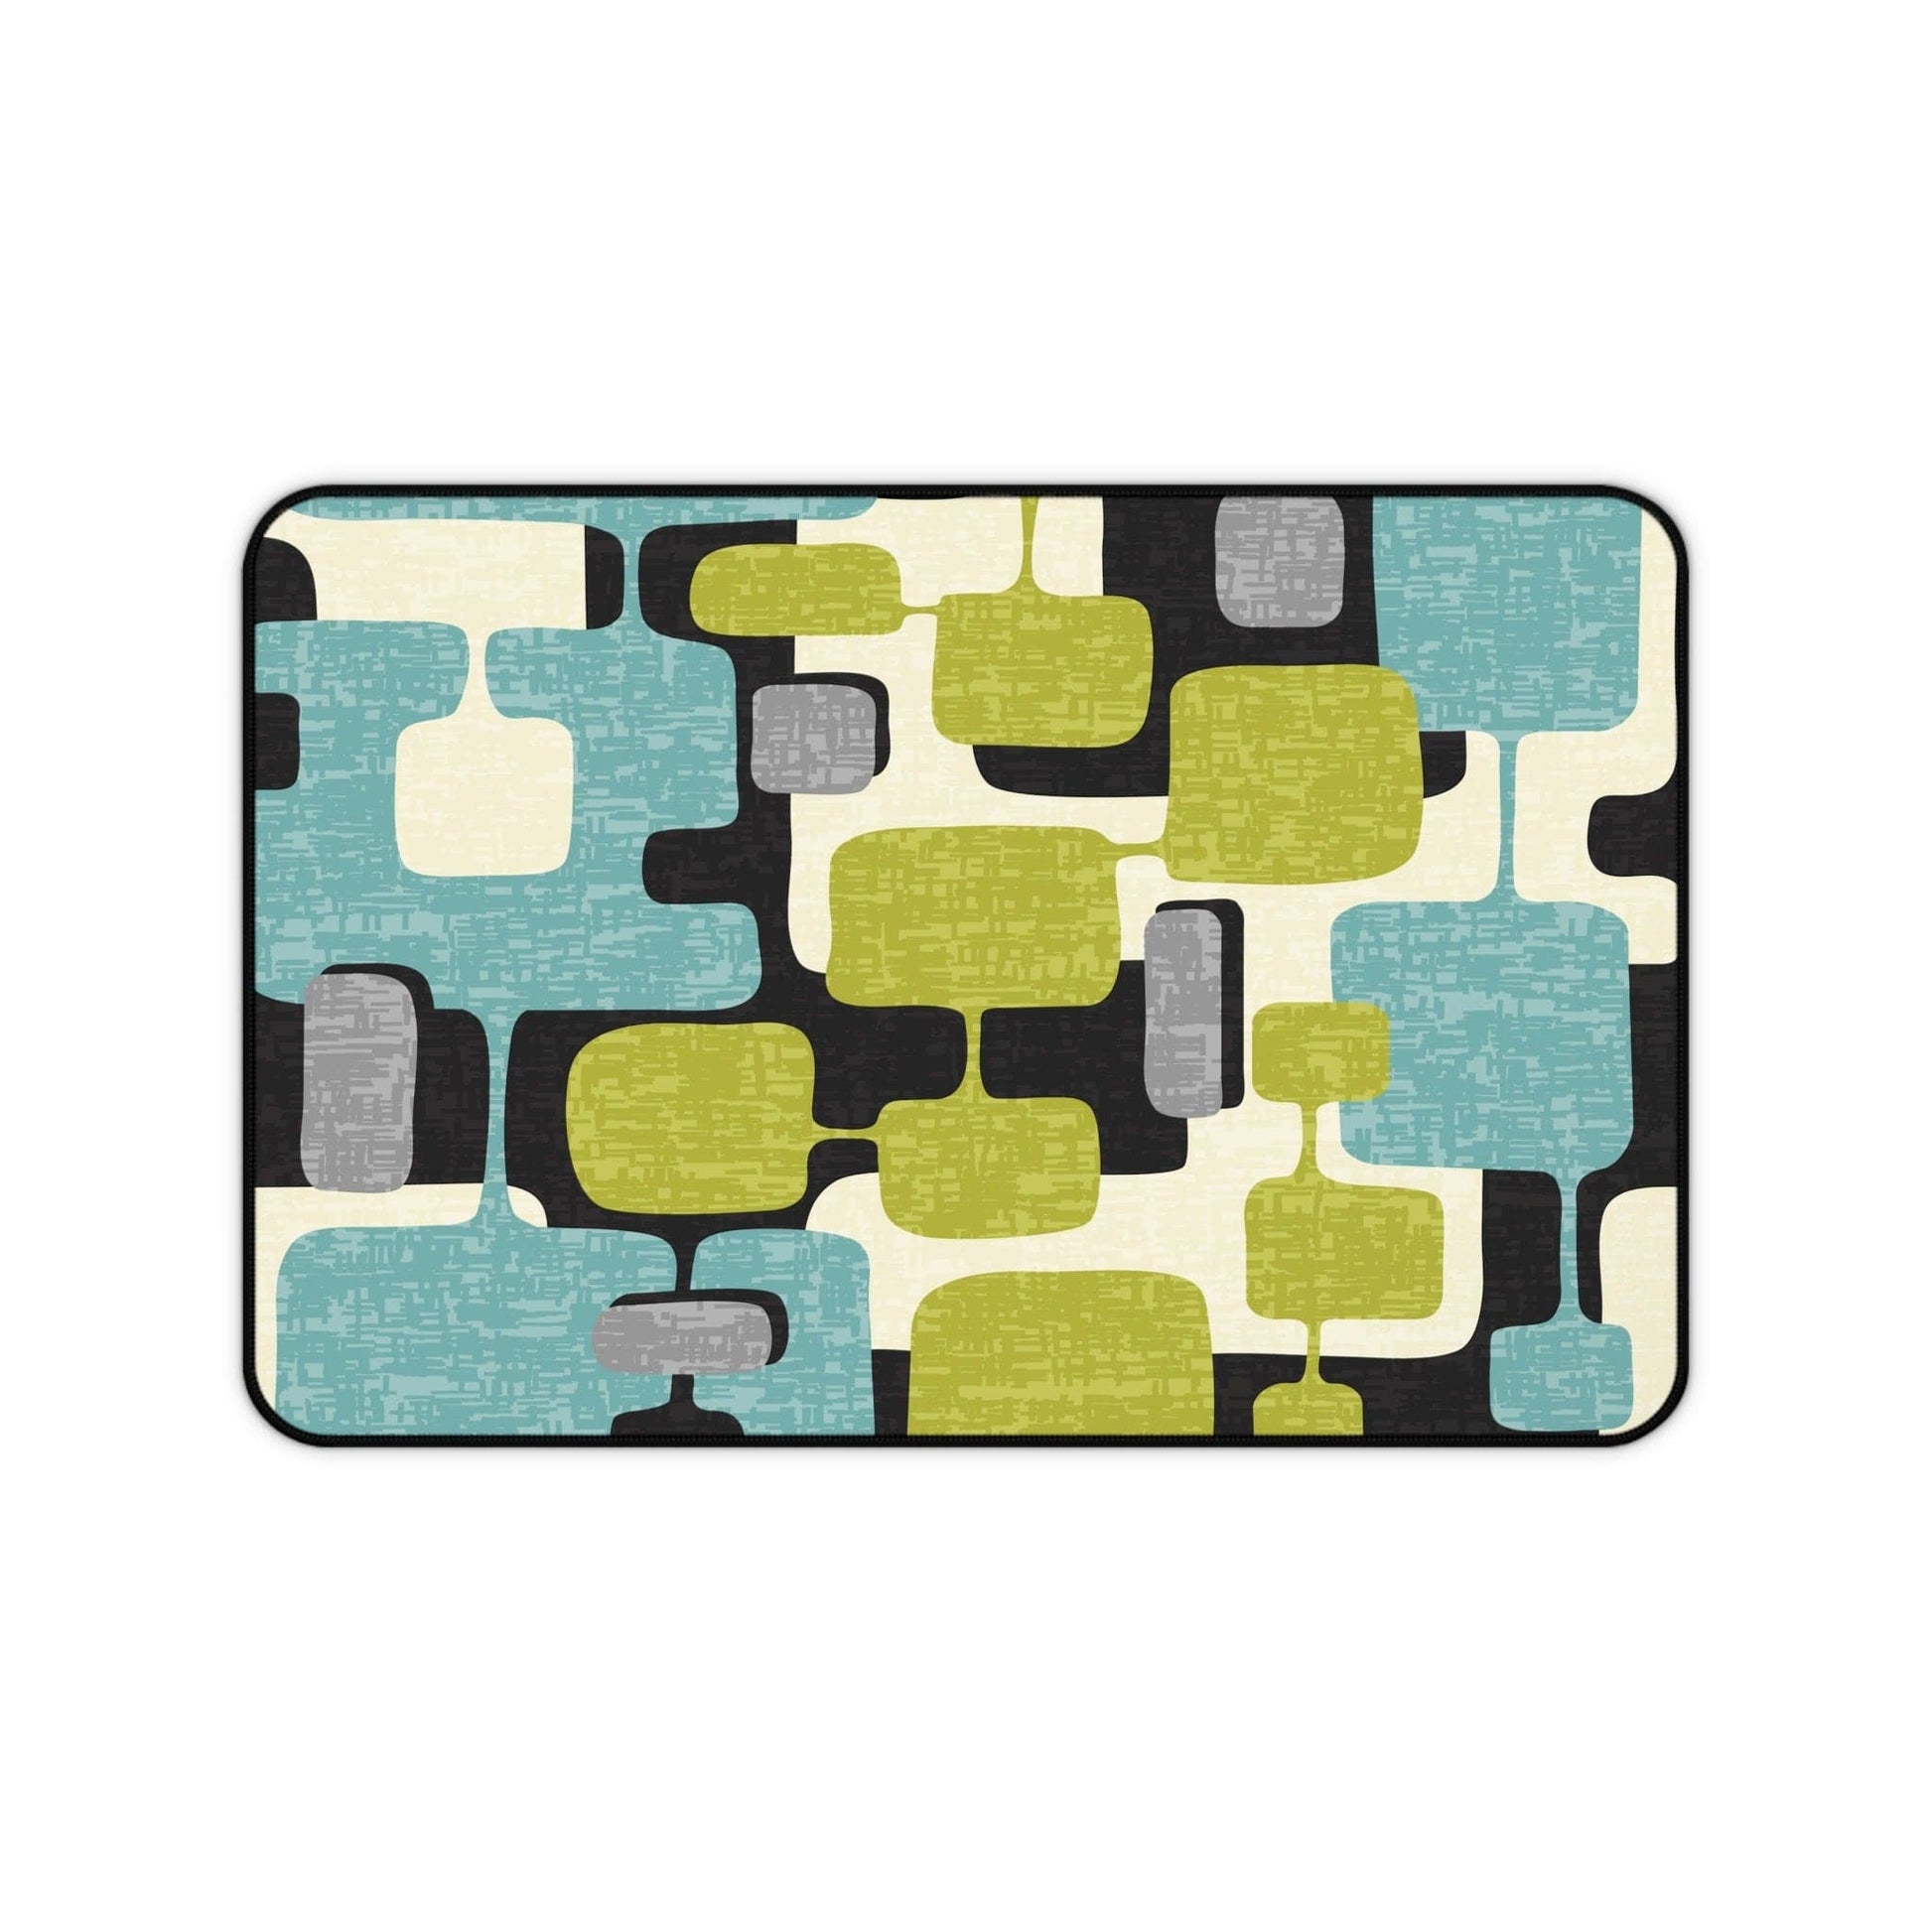 Kate McEnroe New York Mid Century Modern Geometric Abstract Desk Mat, Retro Teal, Lime Green, Gray, Black MCM office Accessories Mouse Pads